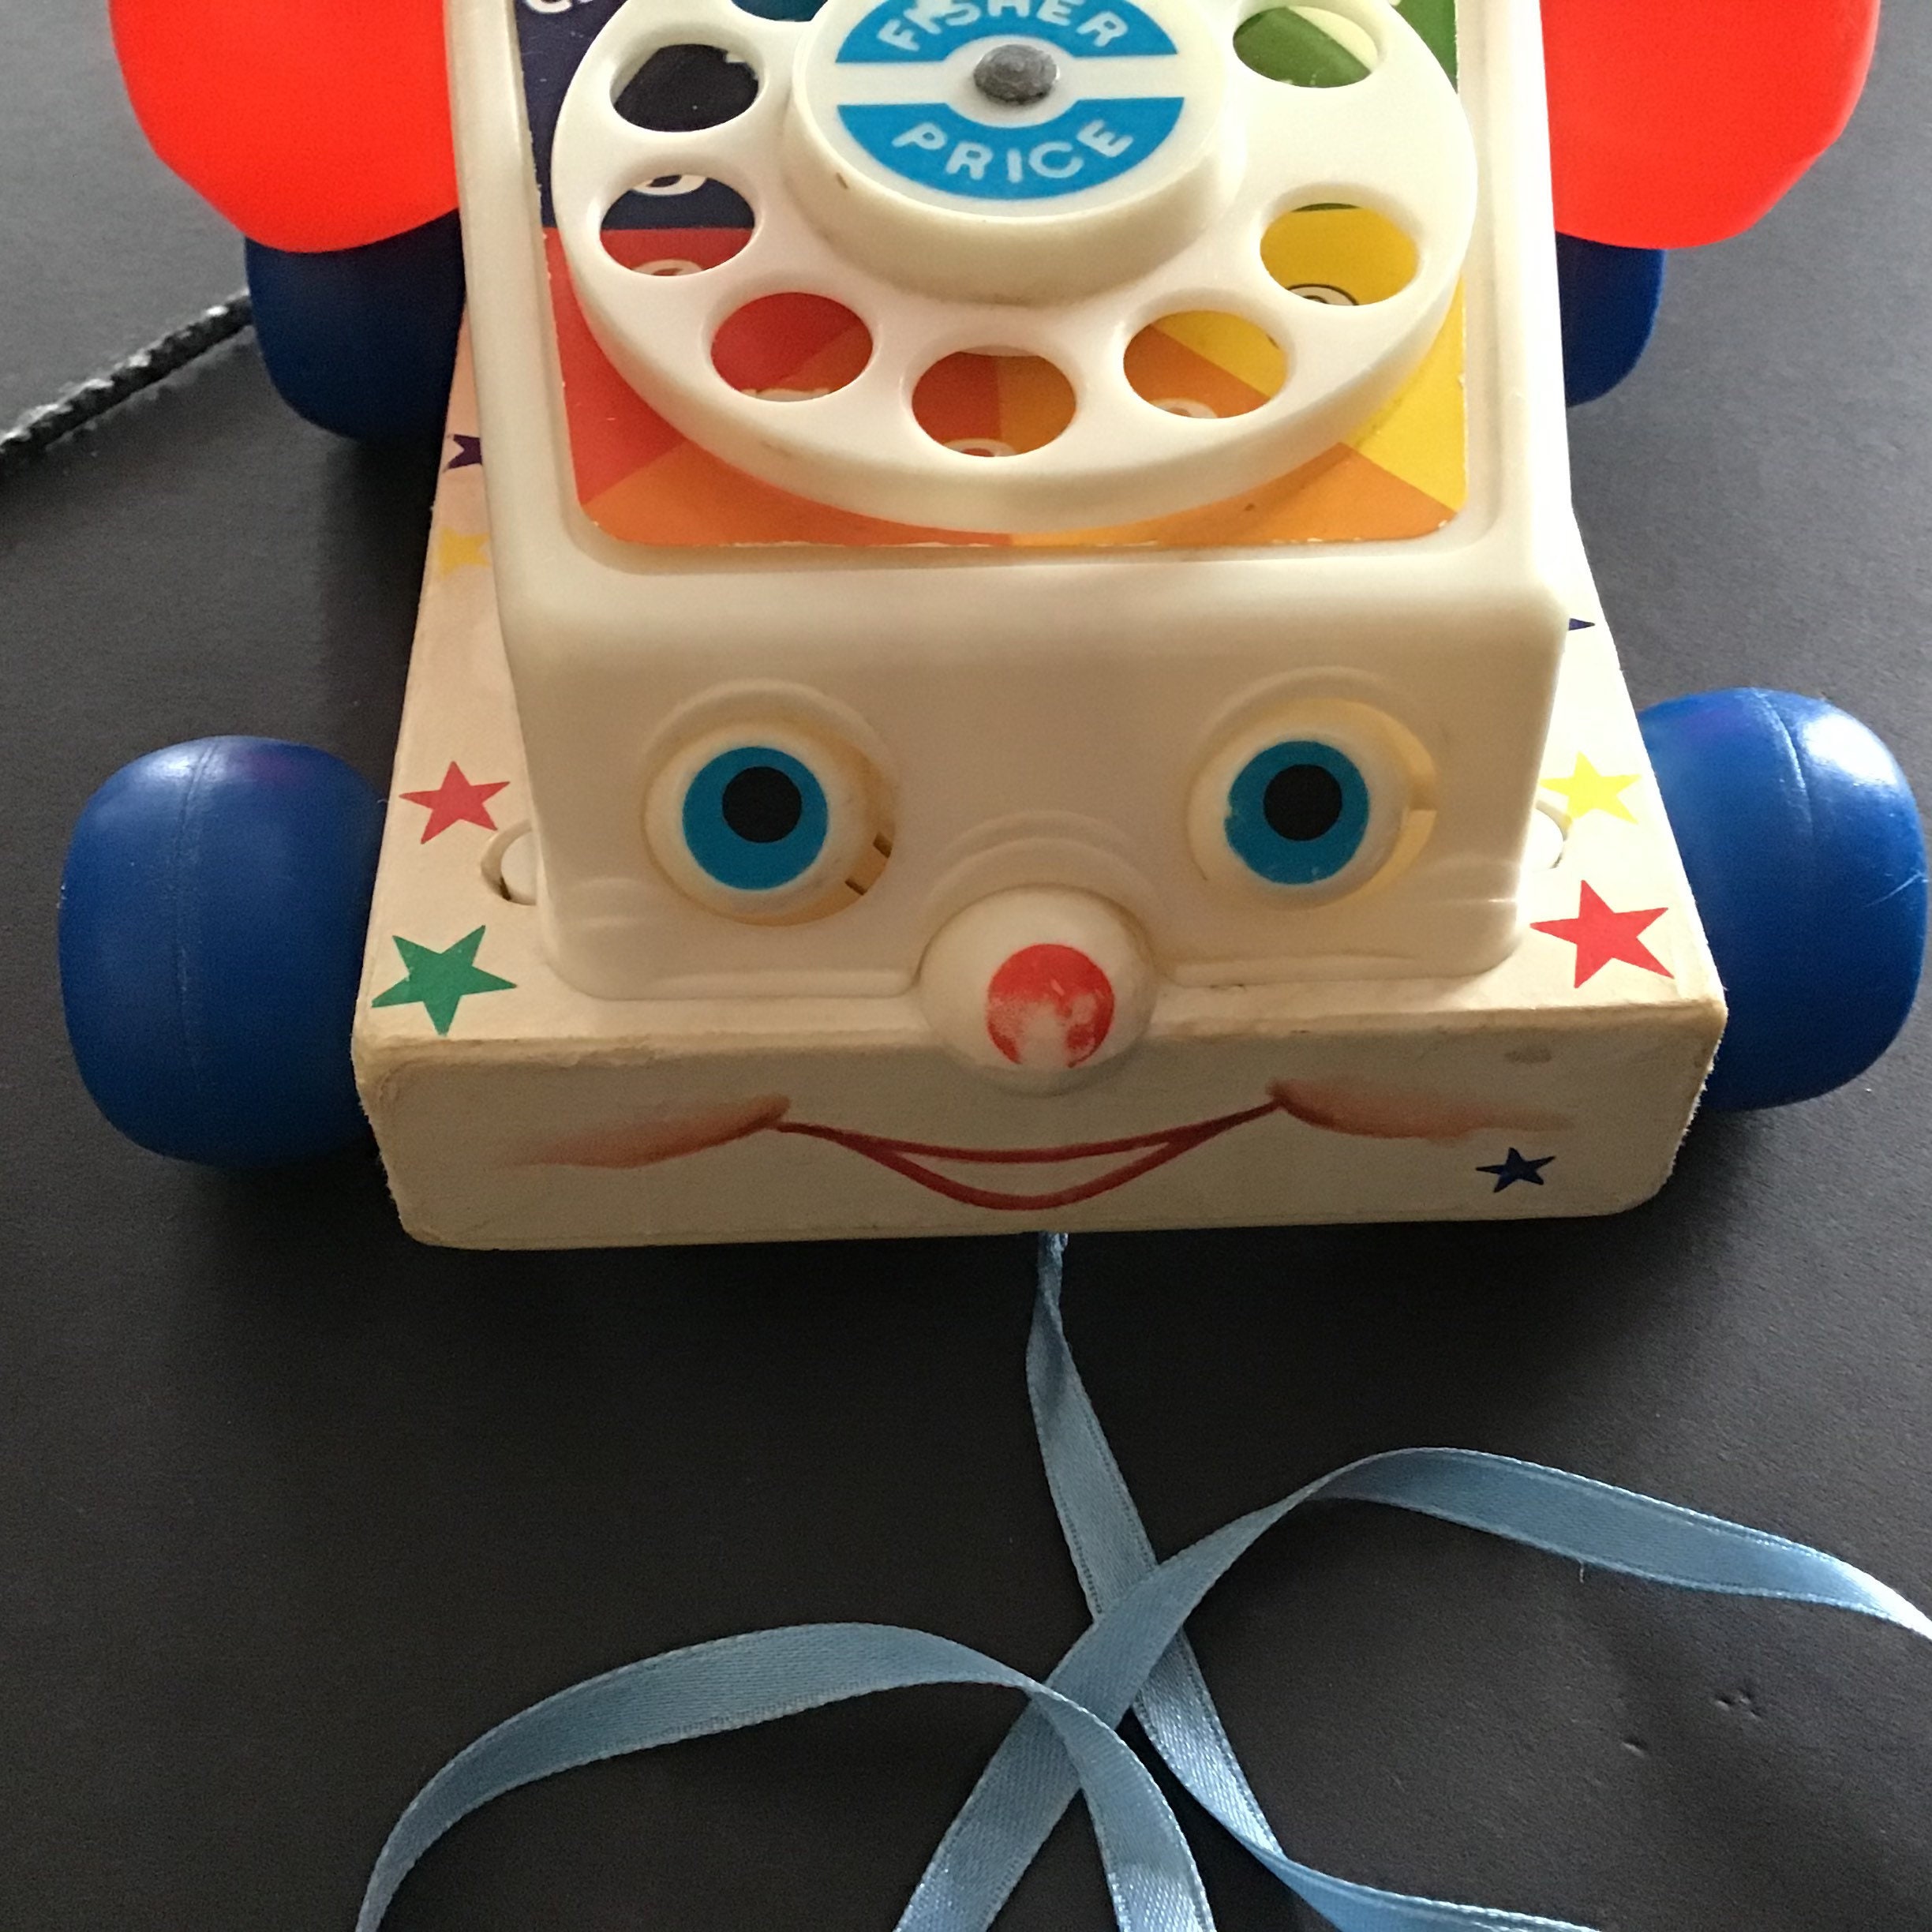 jouet-vintage-telephone-a-tirer-fisher-price-annee-1961-made-in-belgium